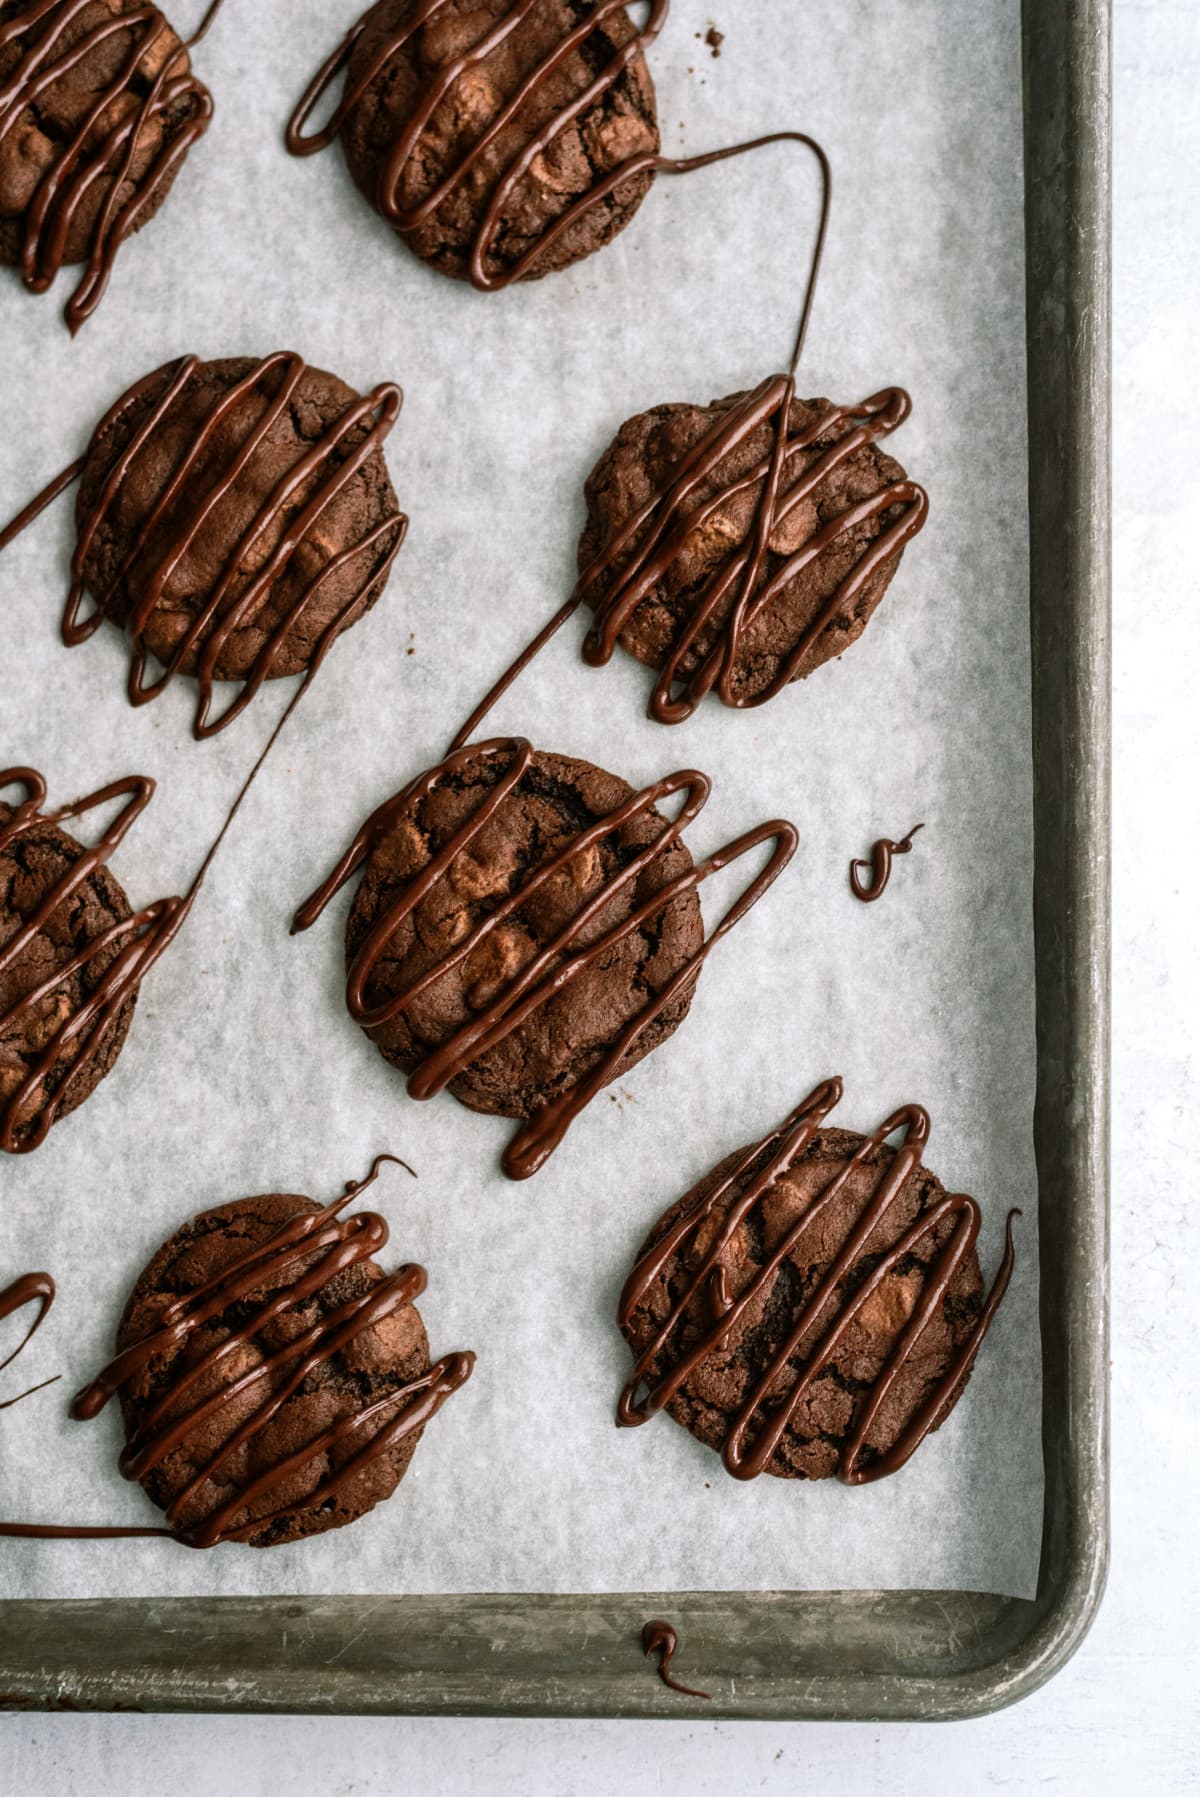 triple-chocolate-candy-cane-cookies